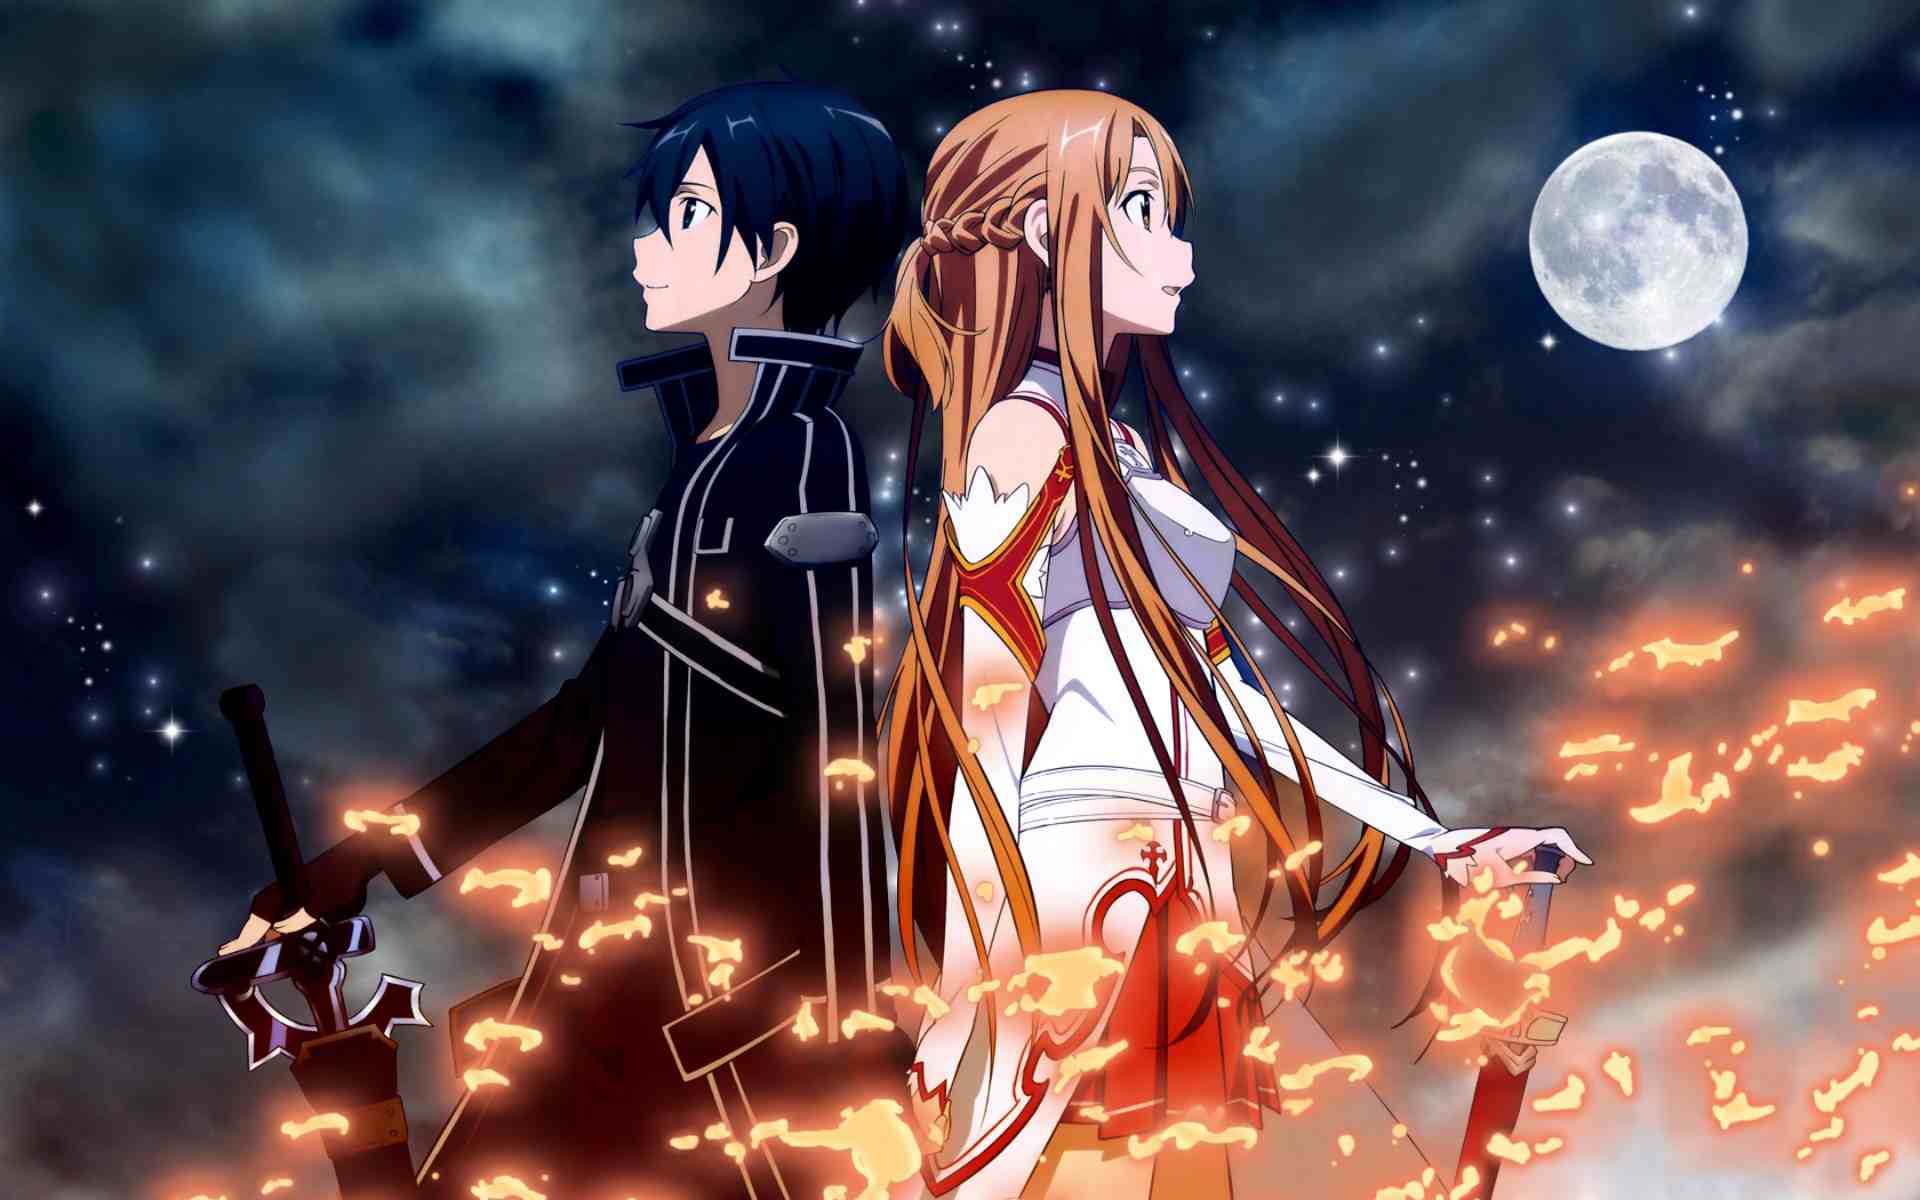 ... hopefully it doesn't turn out a mess),I will look to Sword Art Online as a guide for developing the plot and characters in an interesting way.